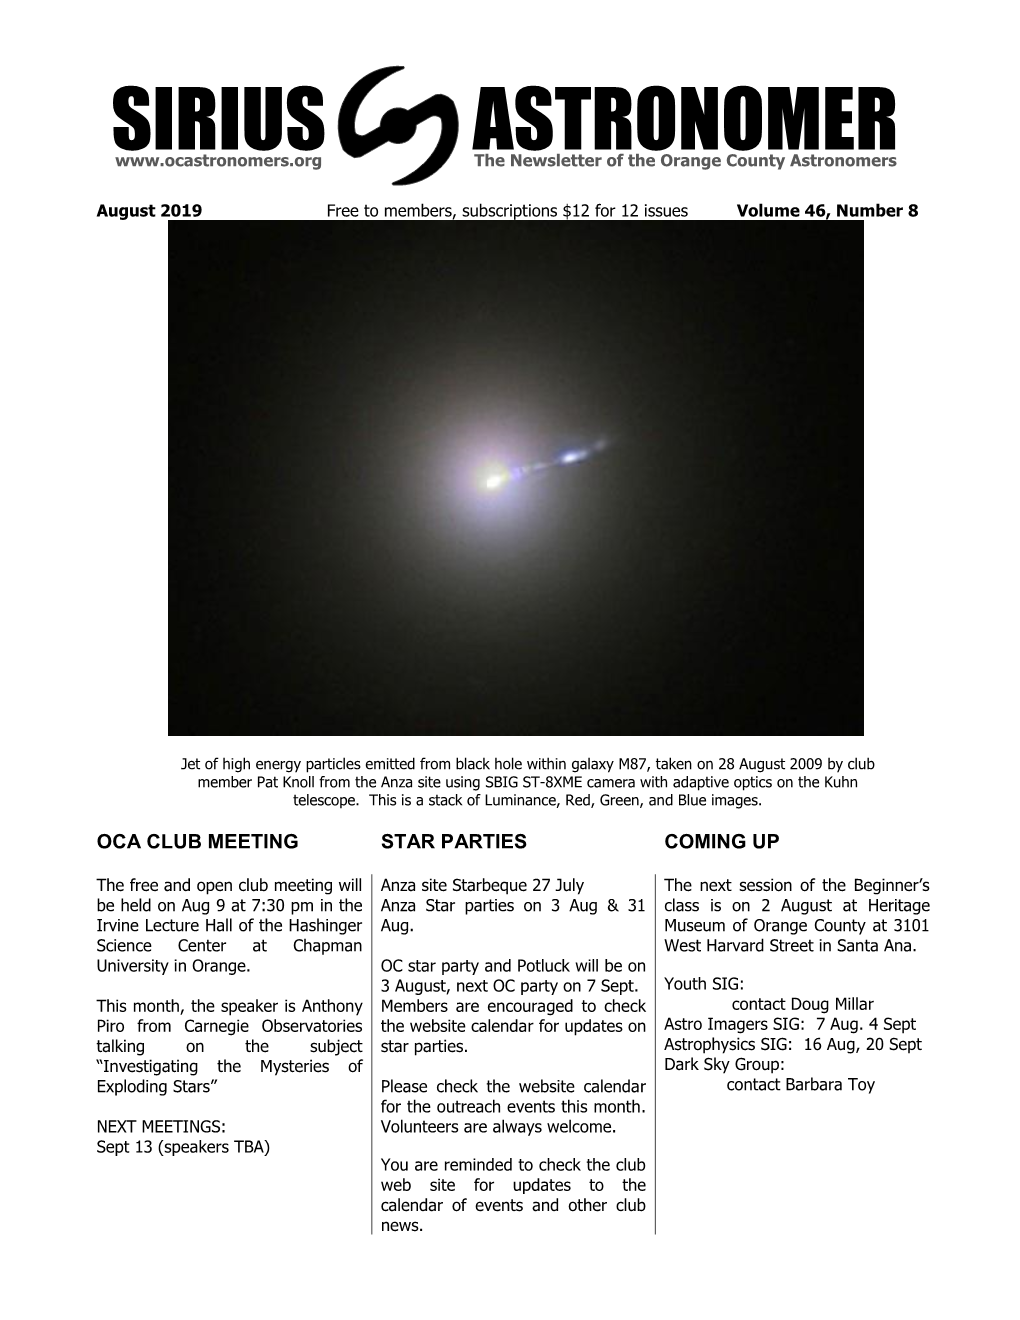 SIRIUS ASTRONOMER the Newsletter of the Orange County Astronomers